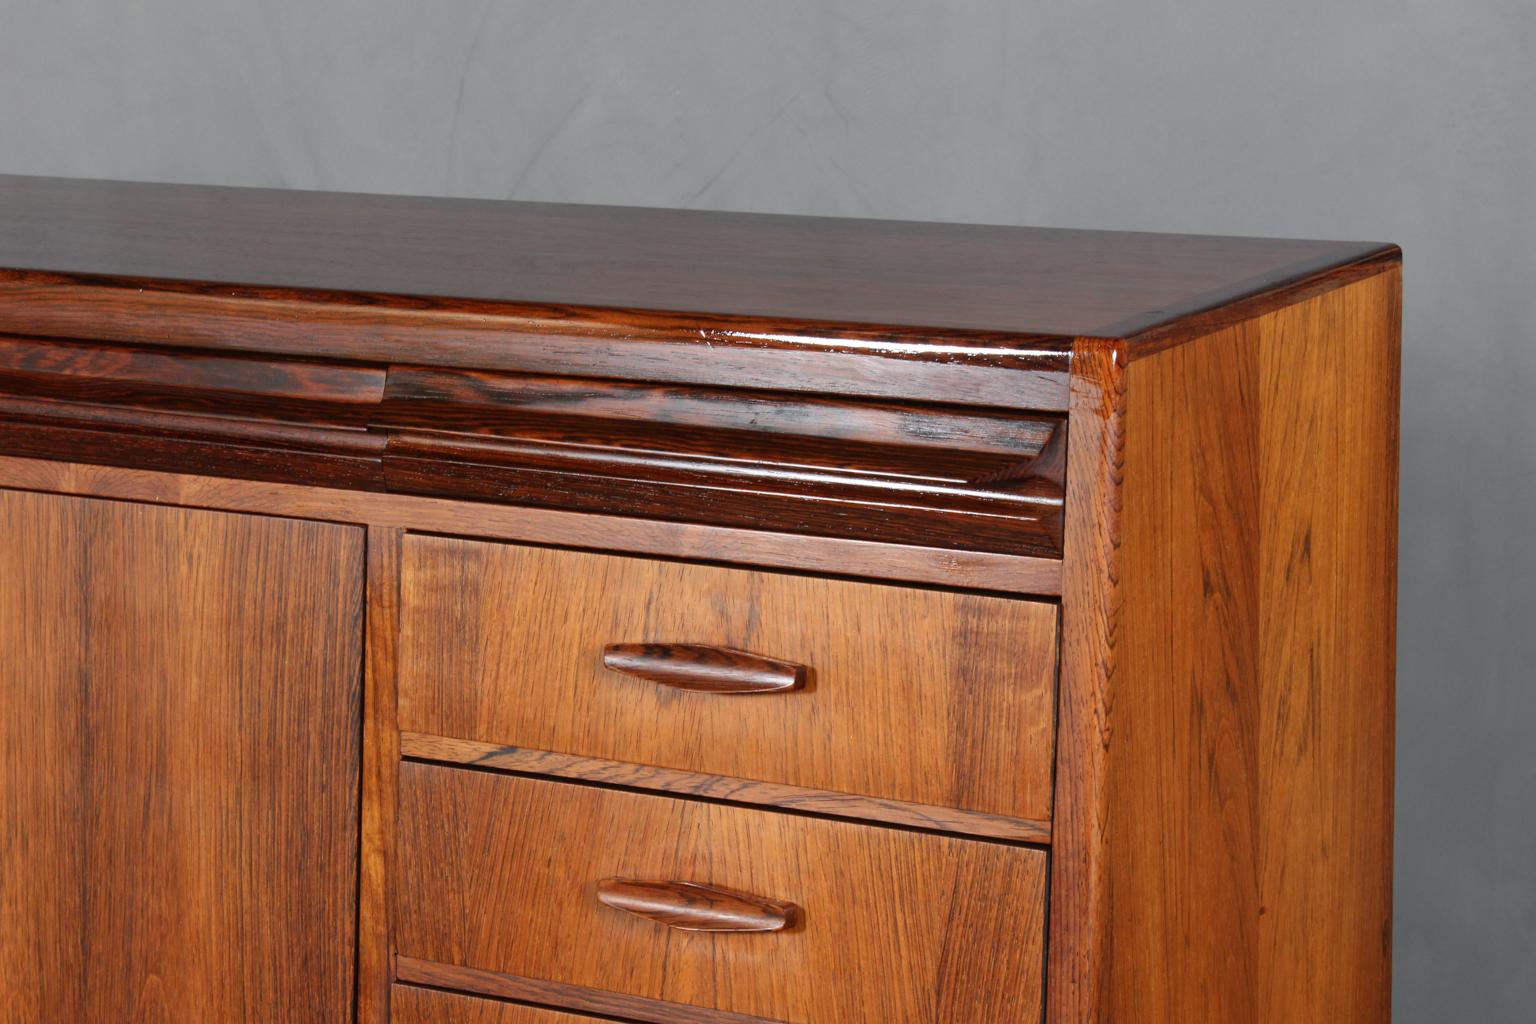 Erling Torvits secretary with drawers and writing desk.

Veenered with rosewood.

Made by Klim Møbelfabrik.